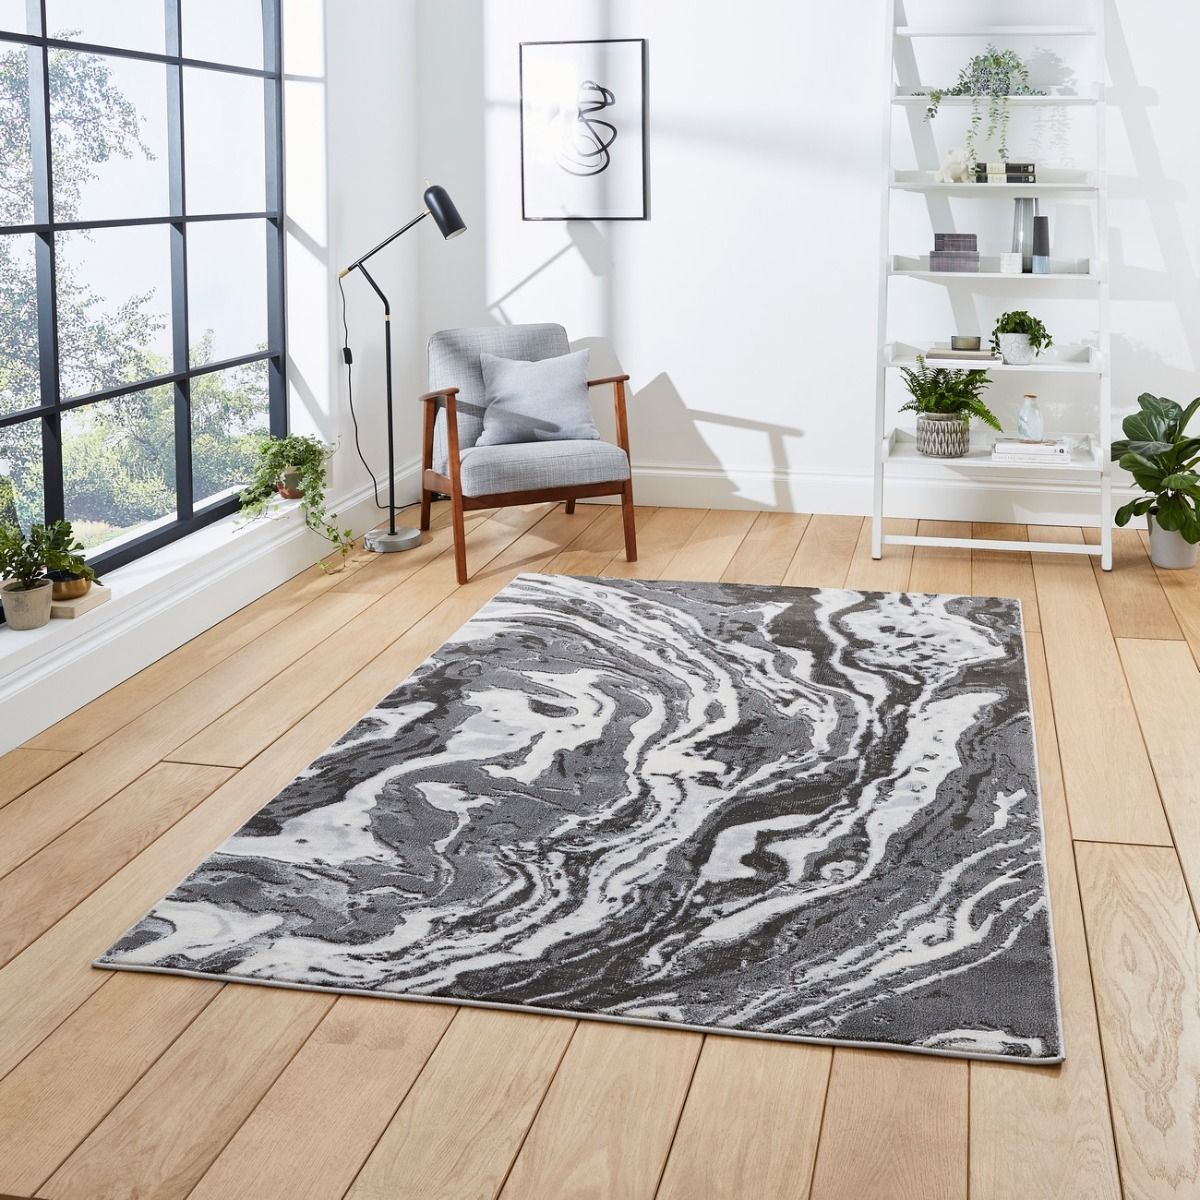 Shop Online Apollo Gr584 Grey Abstract Rug – Therugshopuk In Apollo Rugs (View 4 of 15)